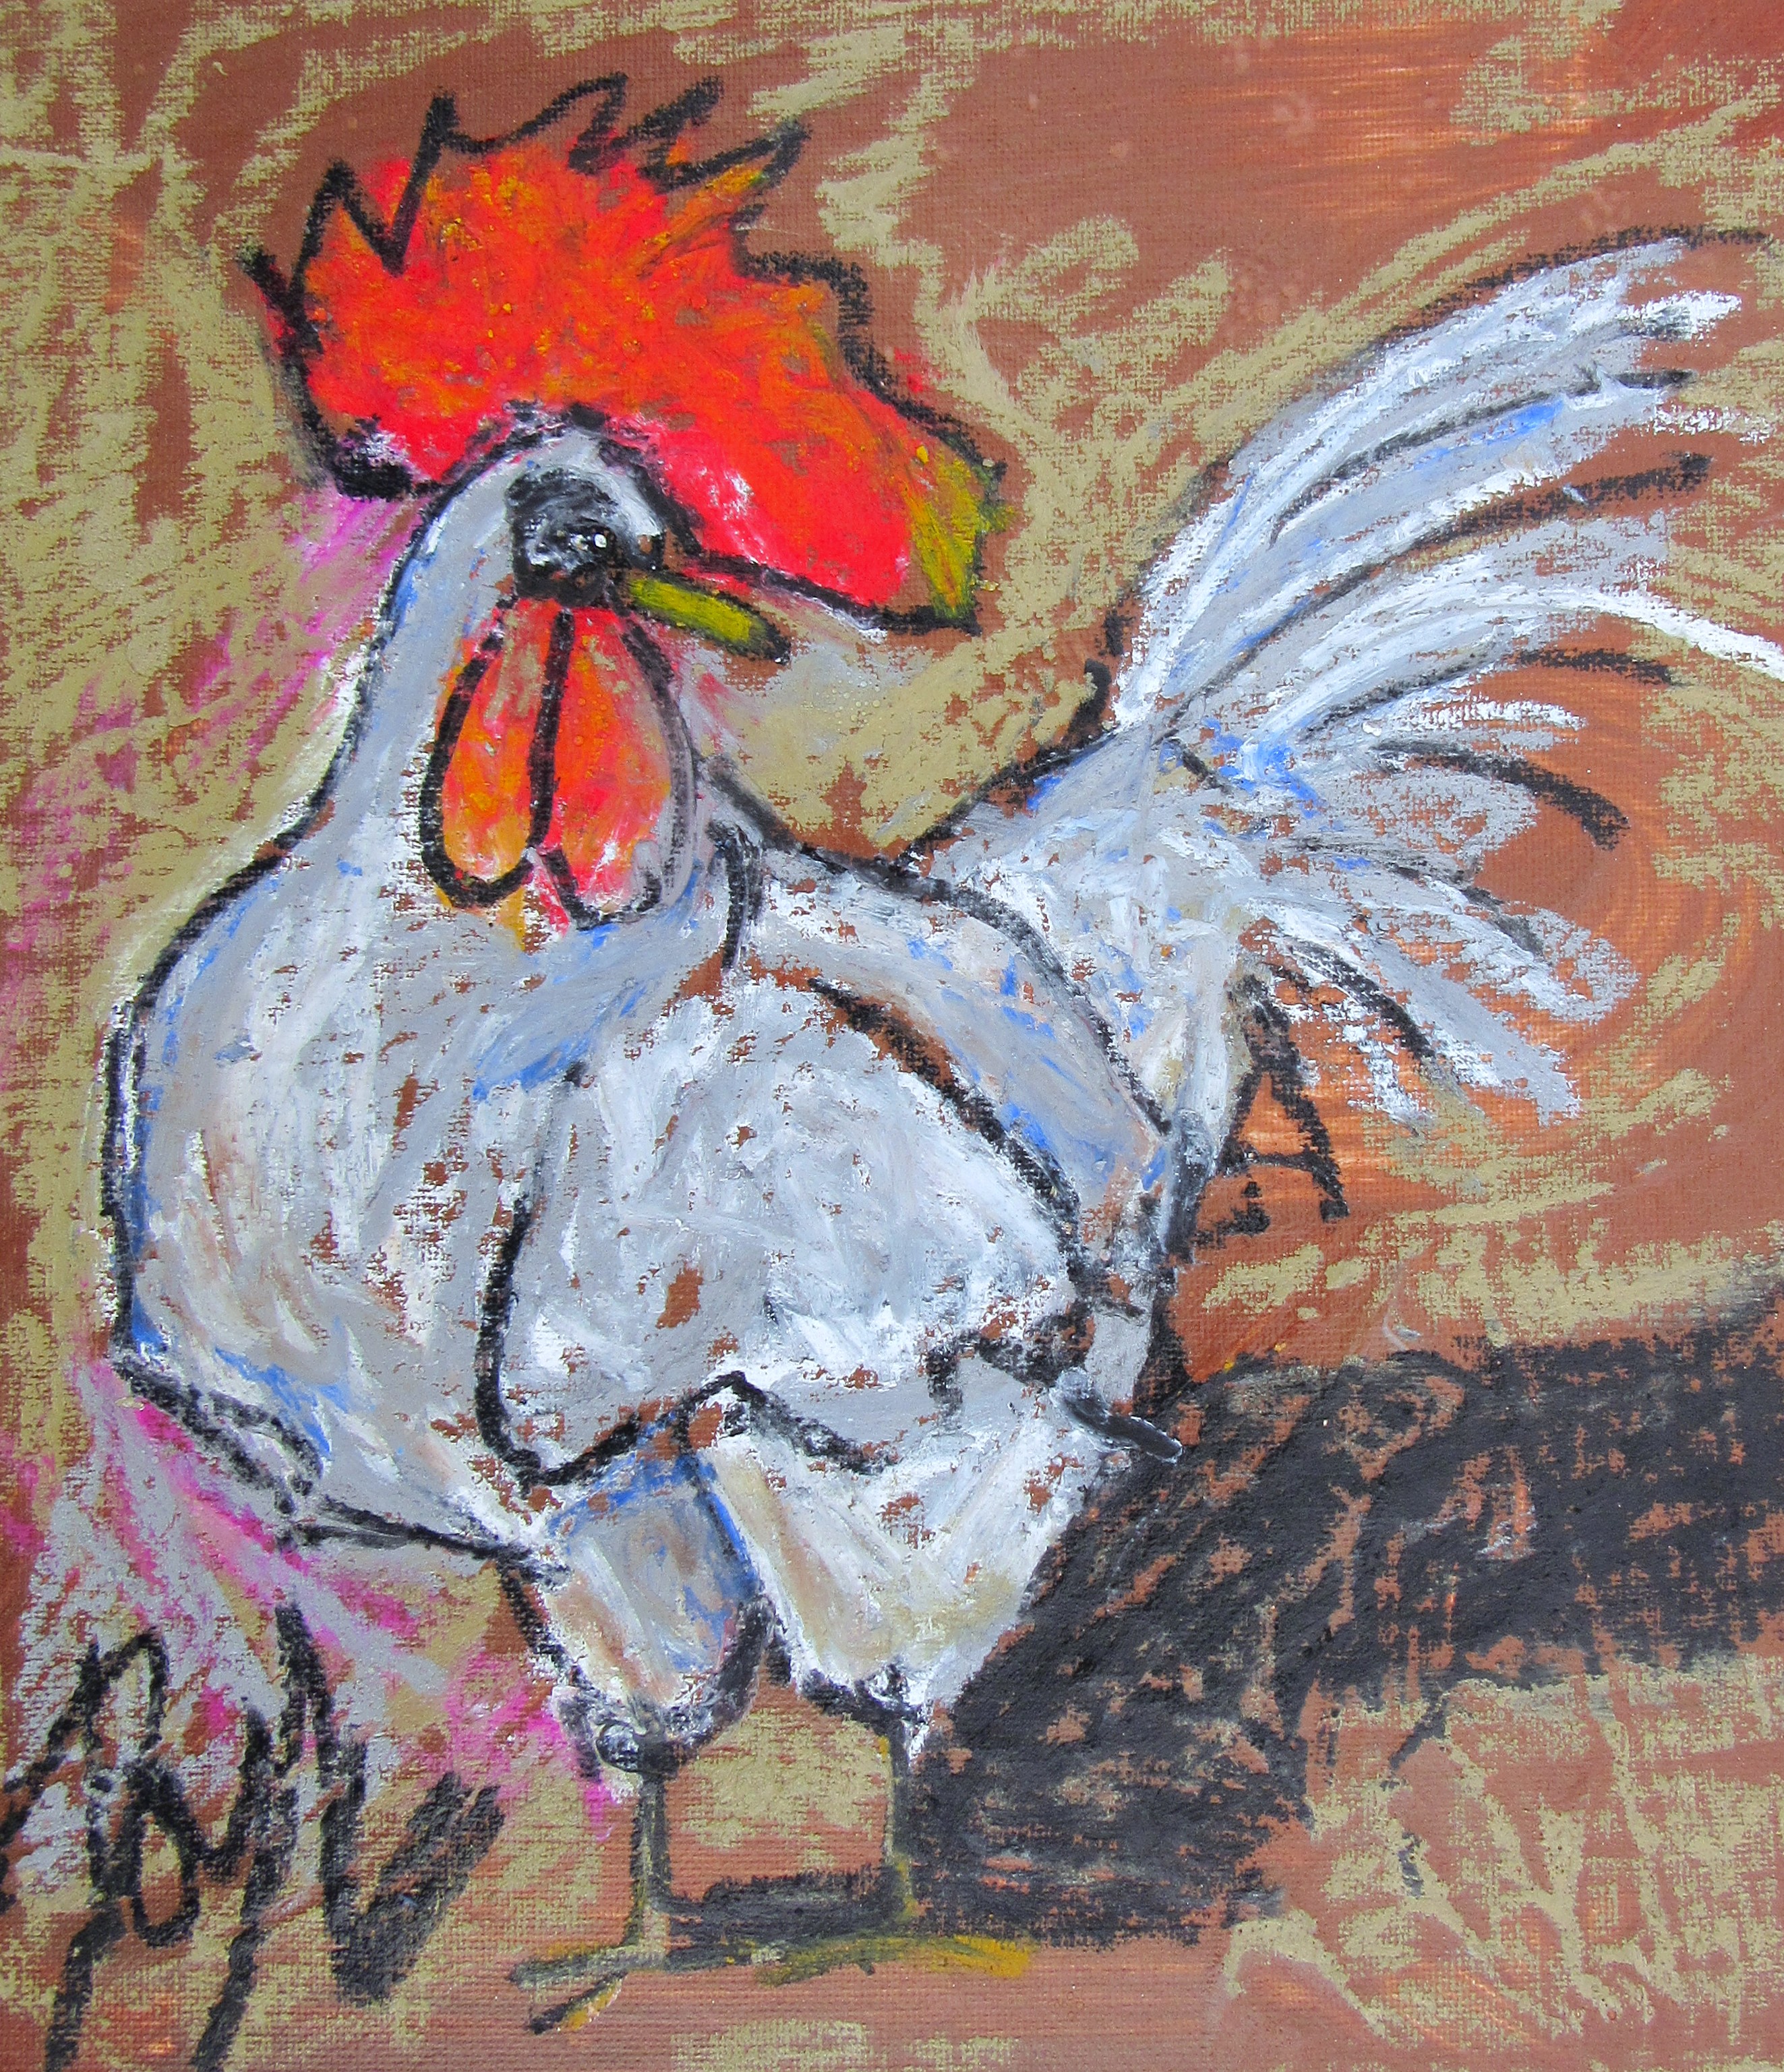 "White Rooster"
12in x 10in
Oil on Canvas Board